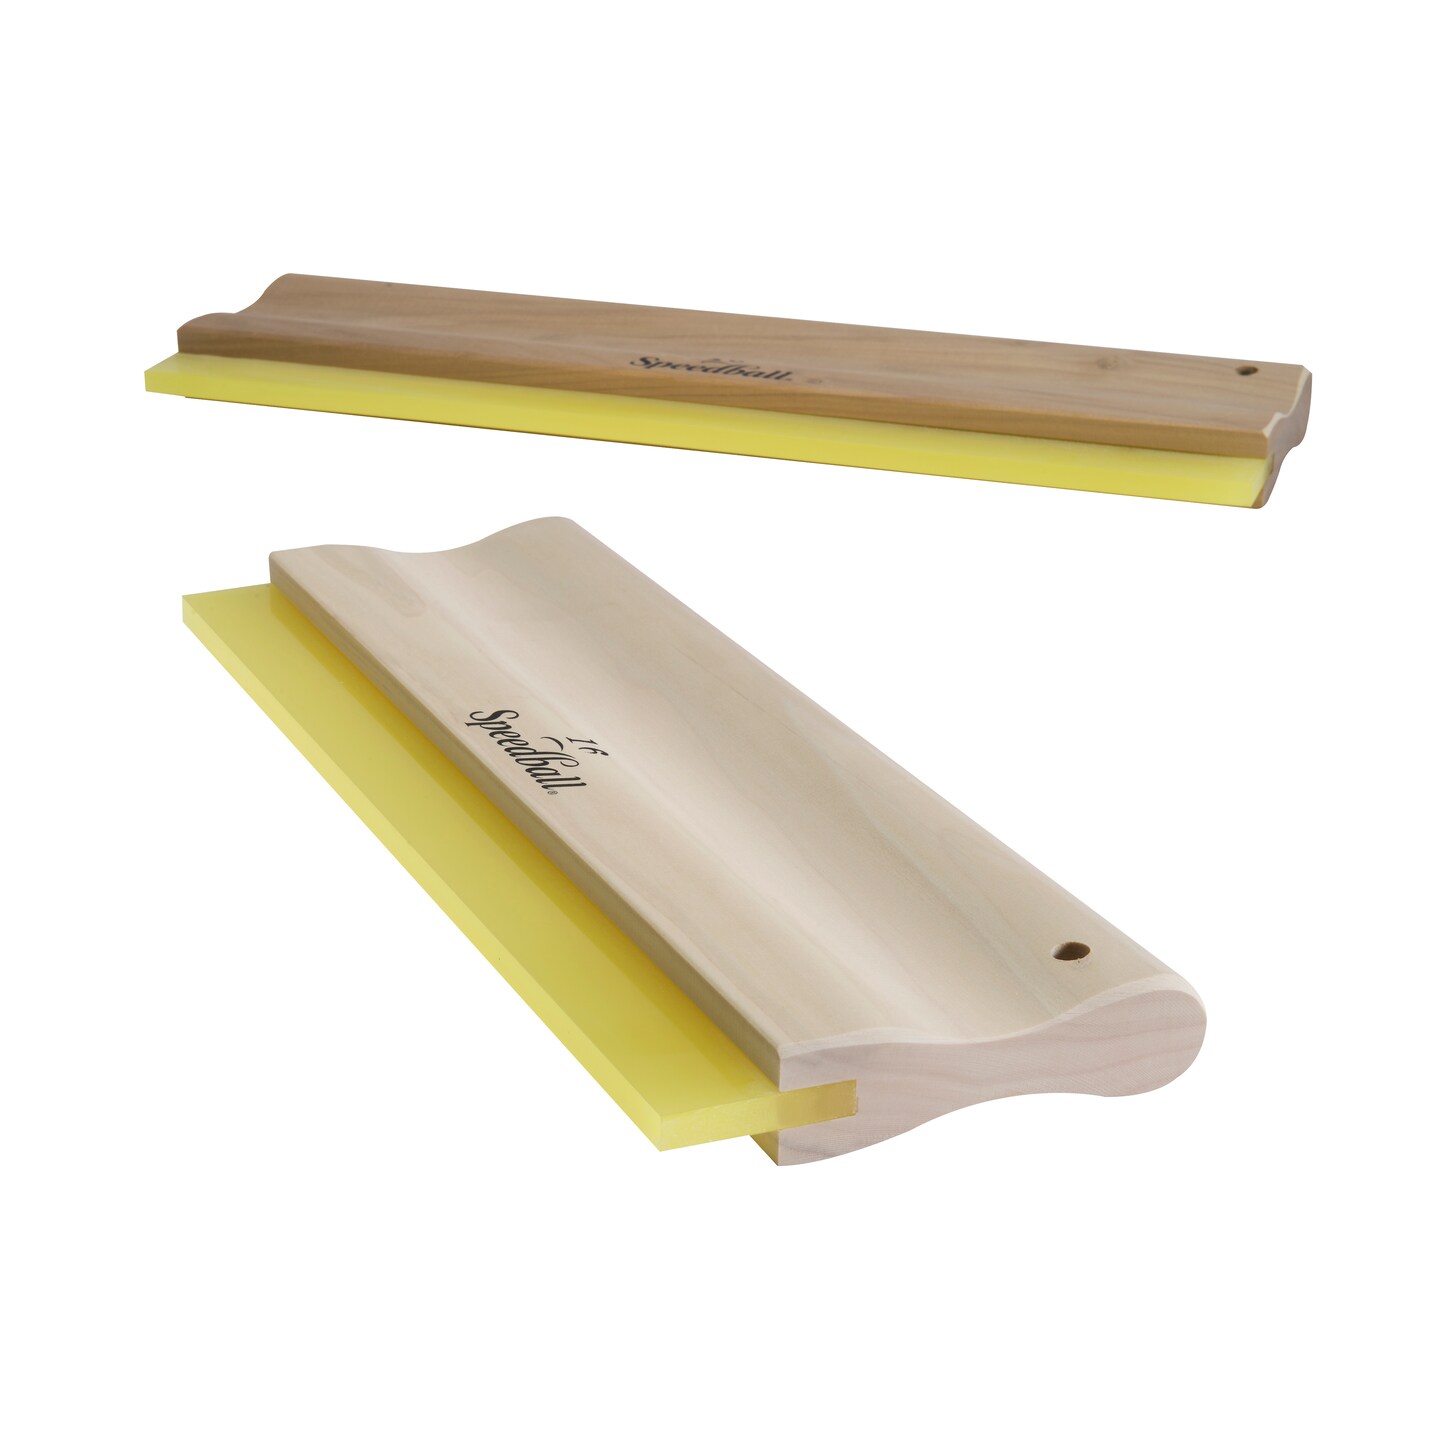 60/90/60D Wood Squeegee– Tech Support Screen Printing Supplies